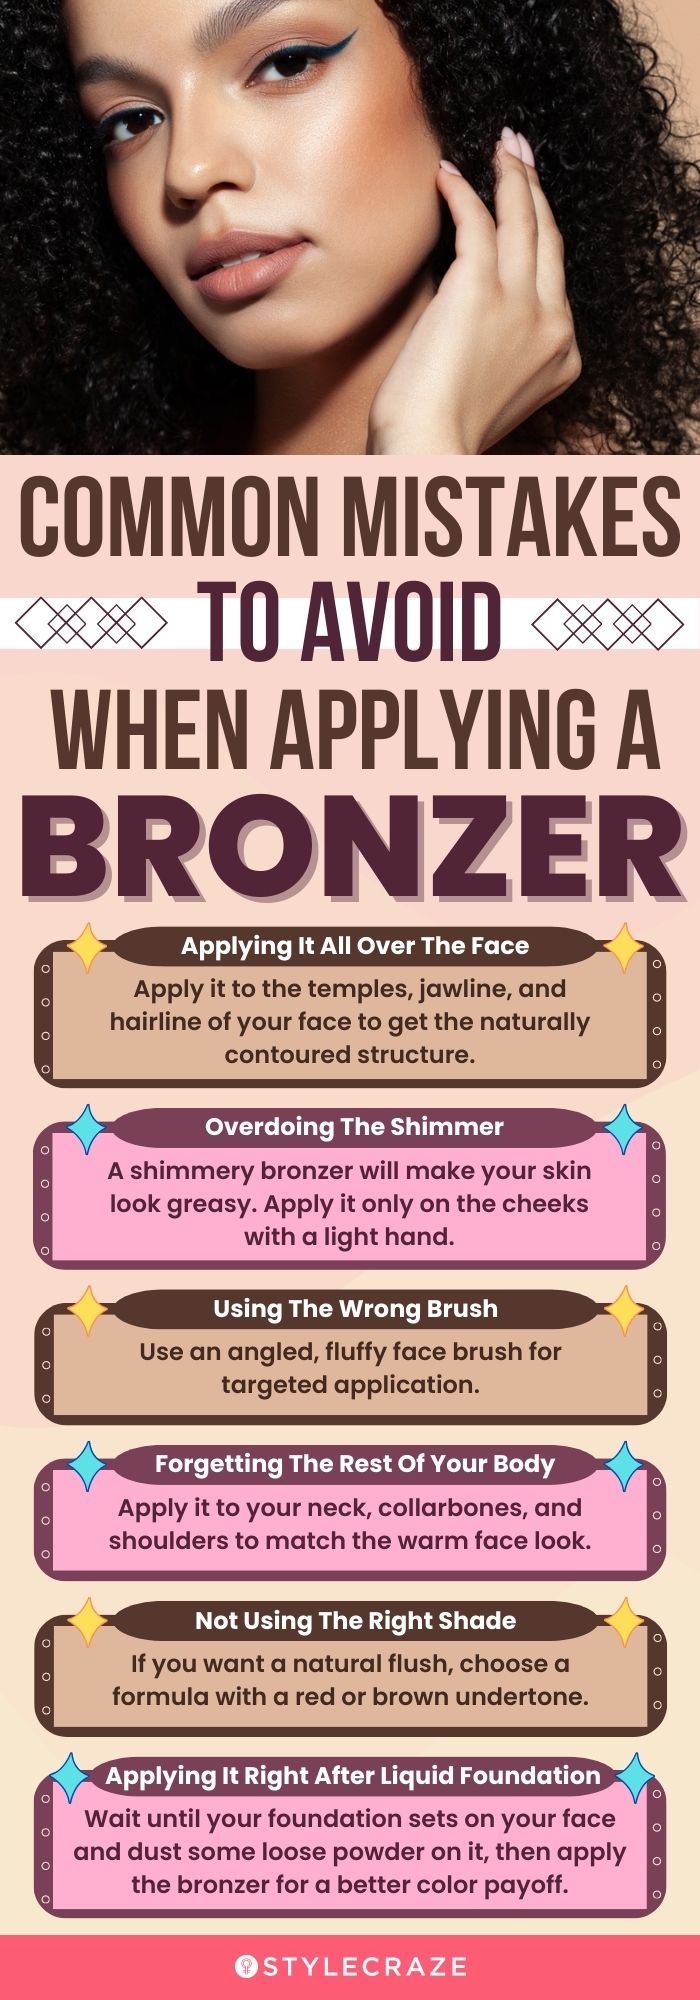  Common Mistakes To Avoid When Applying A Bronzer (infographic)